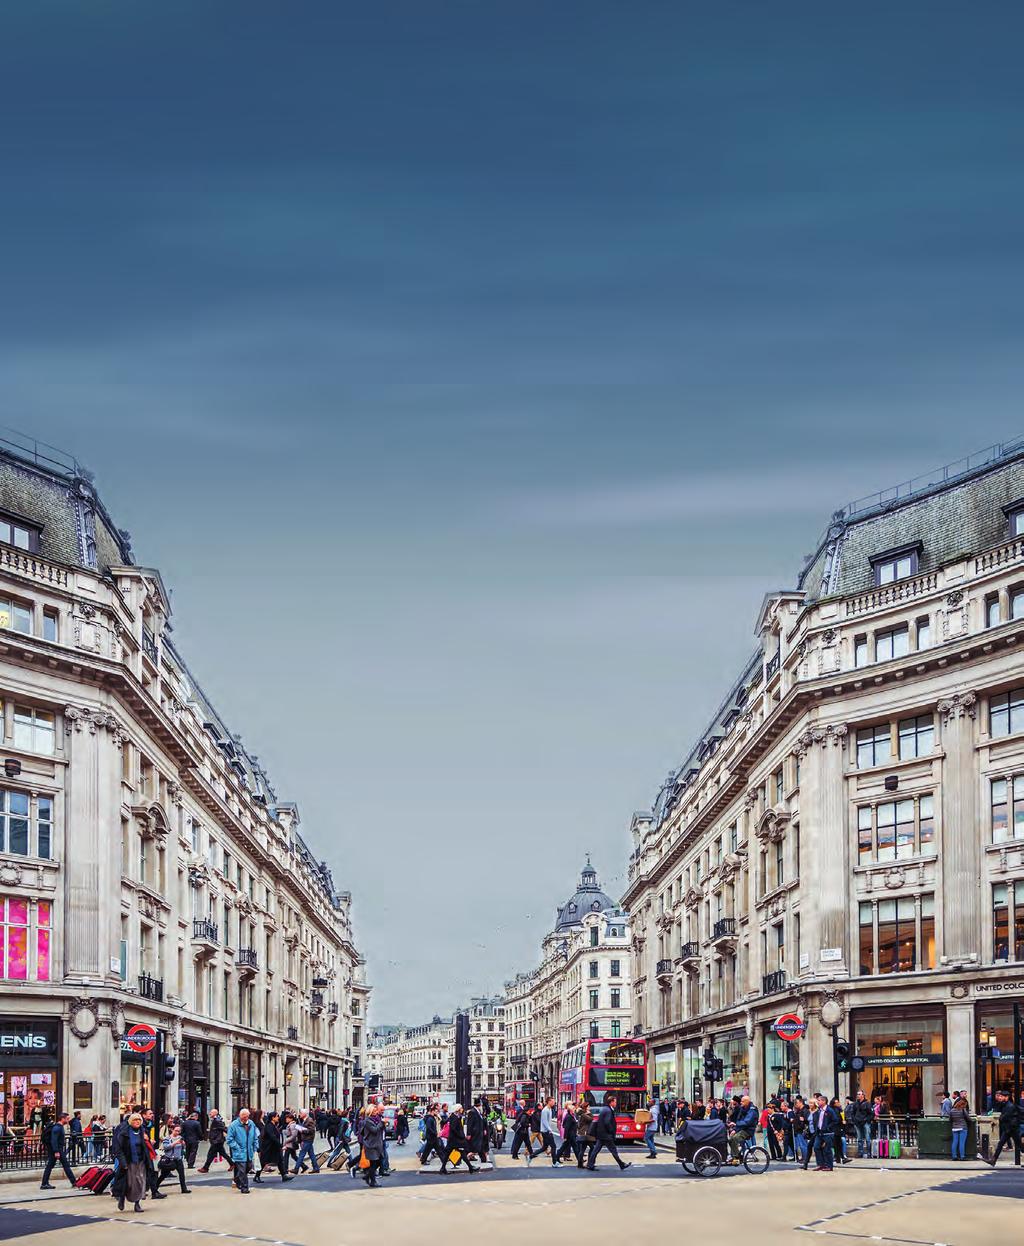 Oxford Street, Long cre and heapside Oxford Street records the highest footfall in our survey.